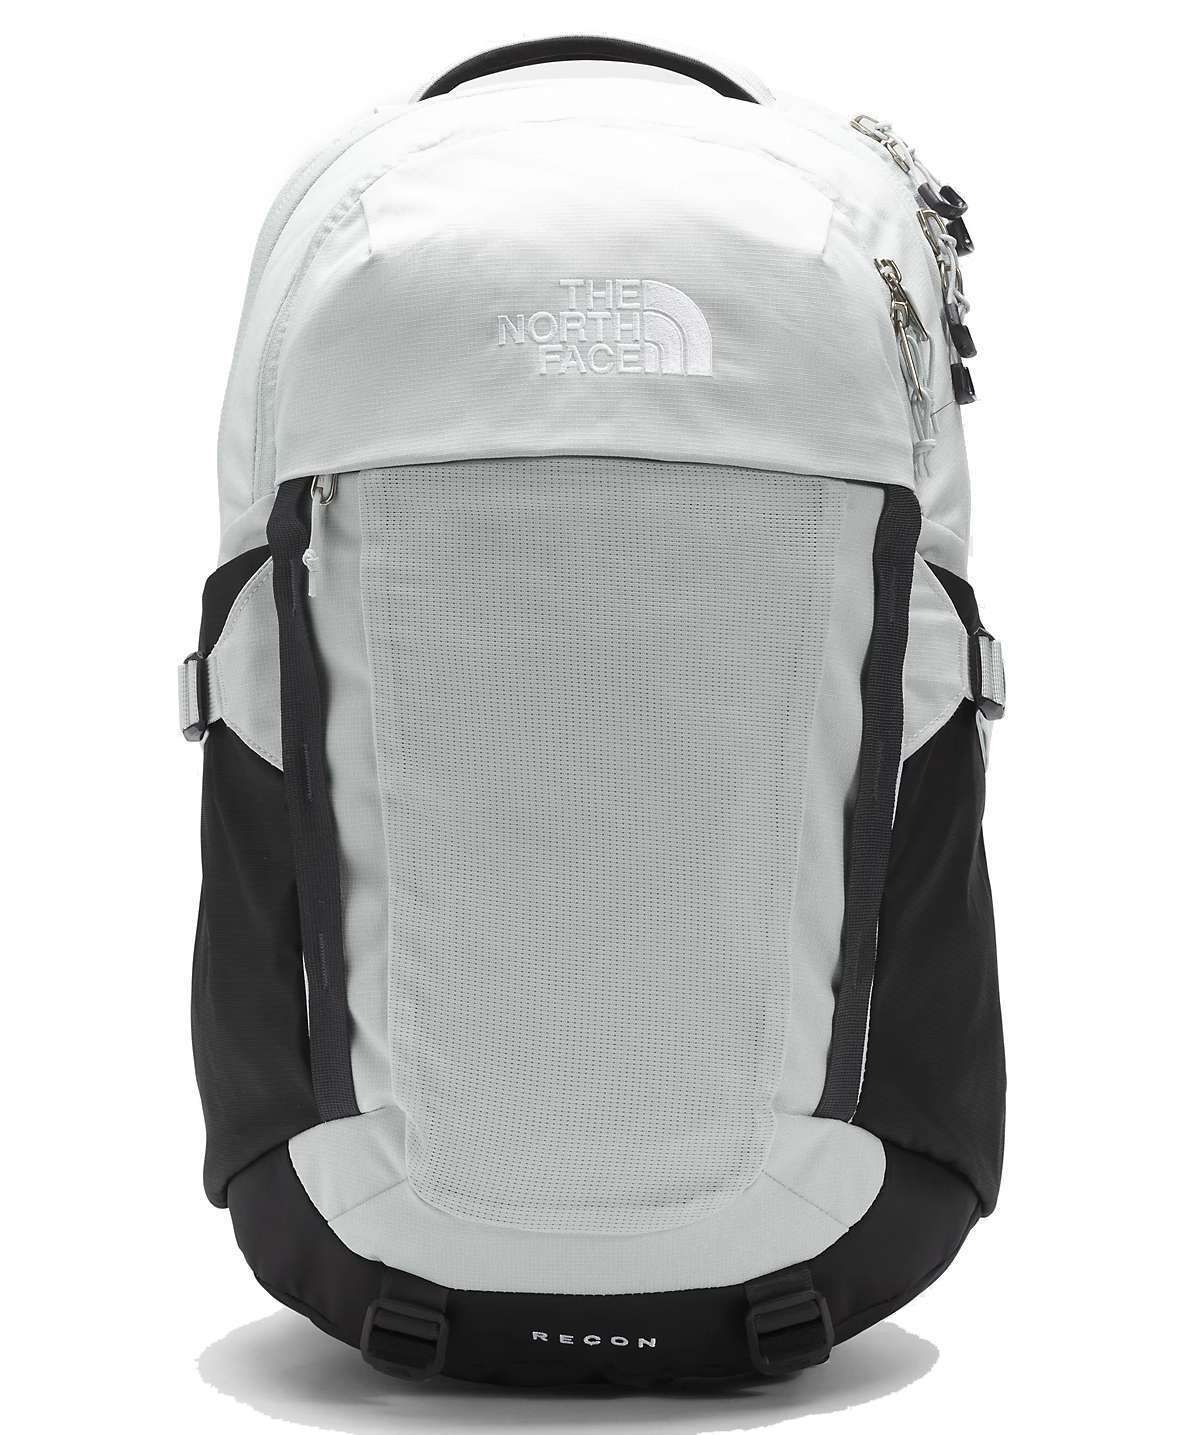 The North Face - Ba lô Nam Nữ Recon Backpack